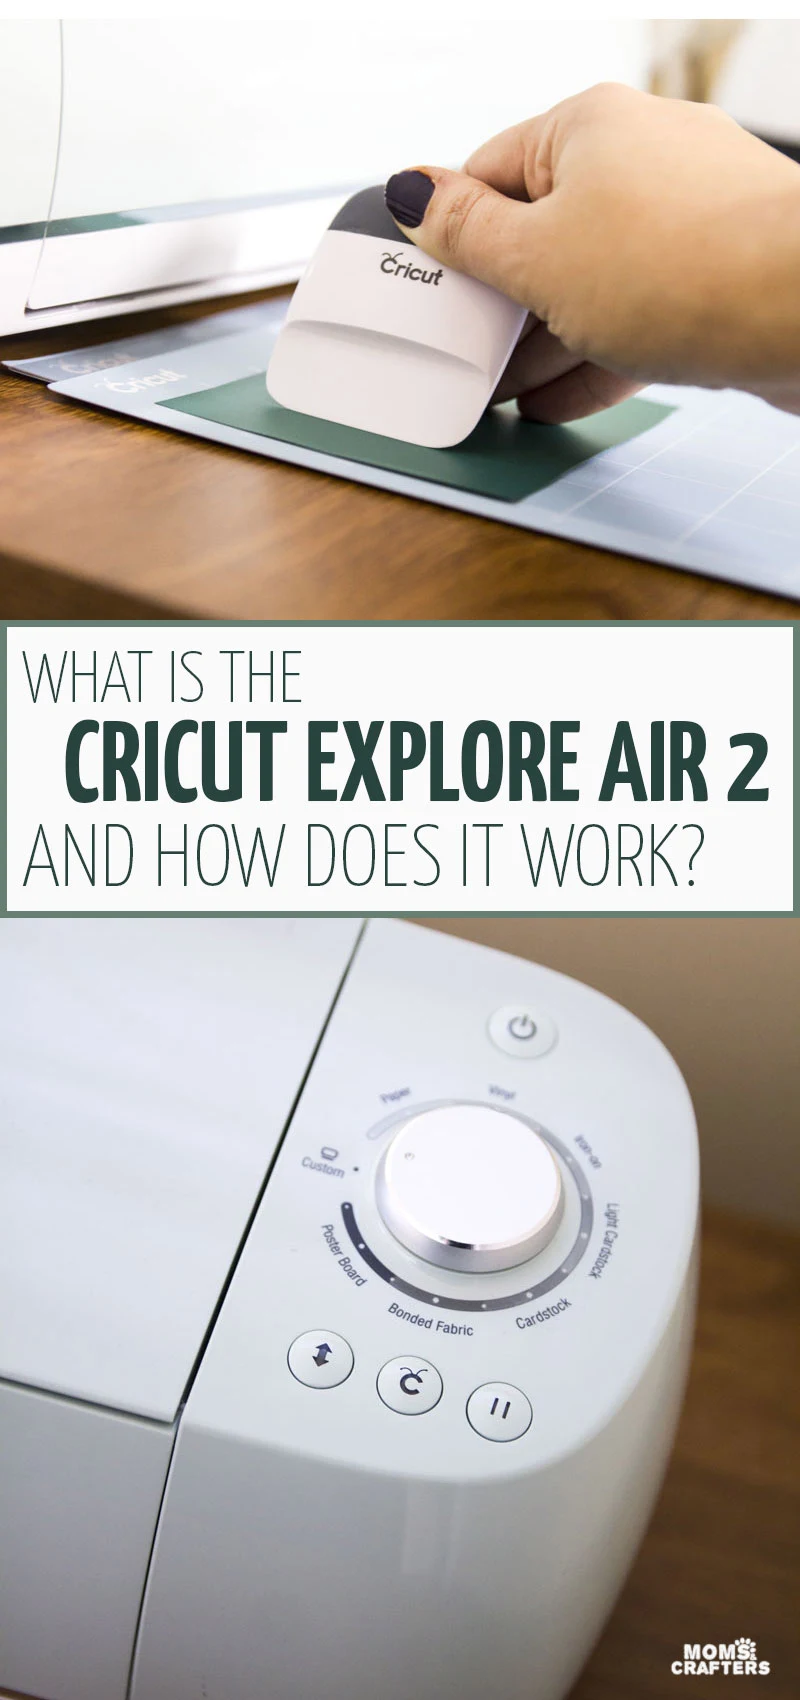 What is the cricut explore air 2 and how does it work? Which materials can you cut with a cricut? What are some beginner projects to make with the cricut? Learn how to use a cricut machine in this comprehensive cricut explore air 2 review.